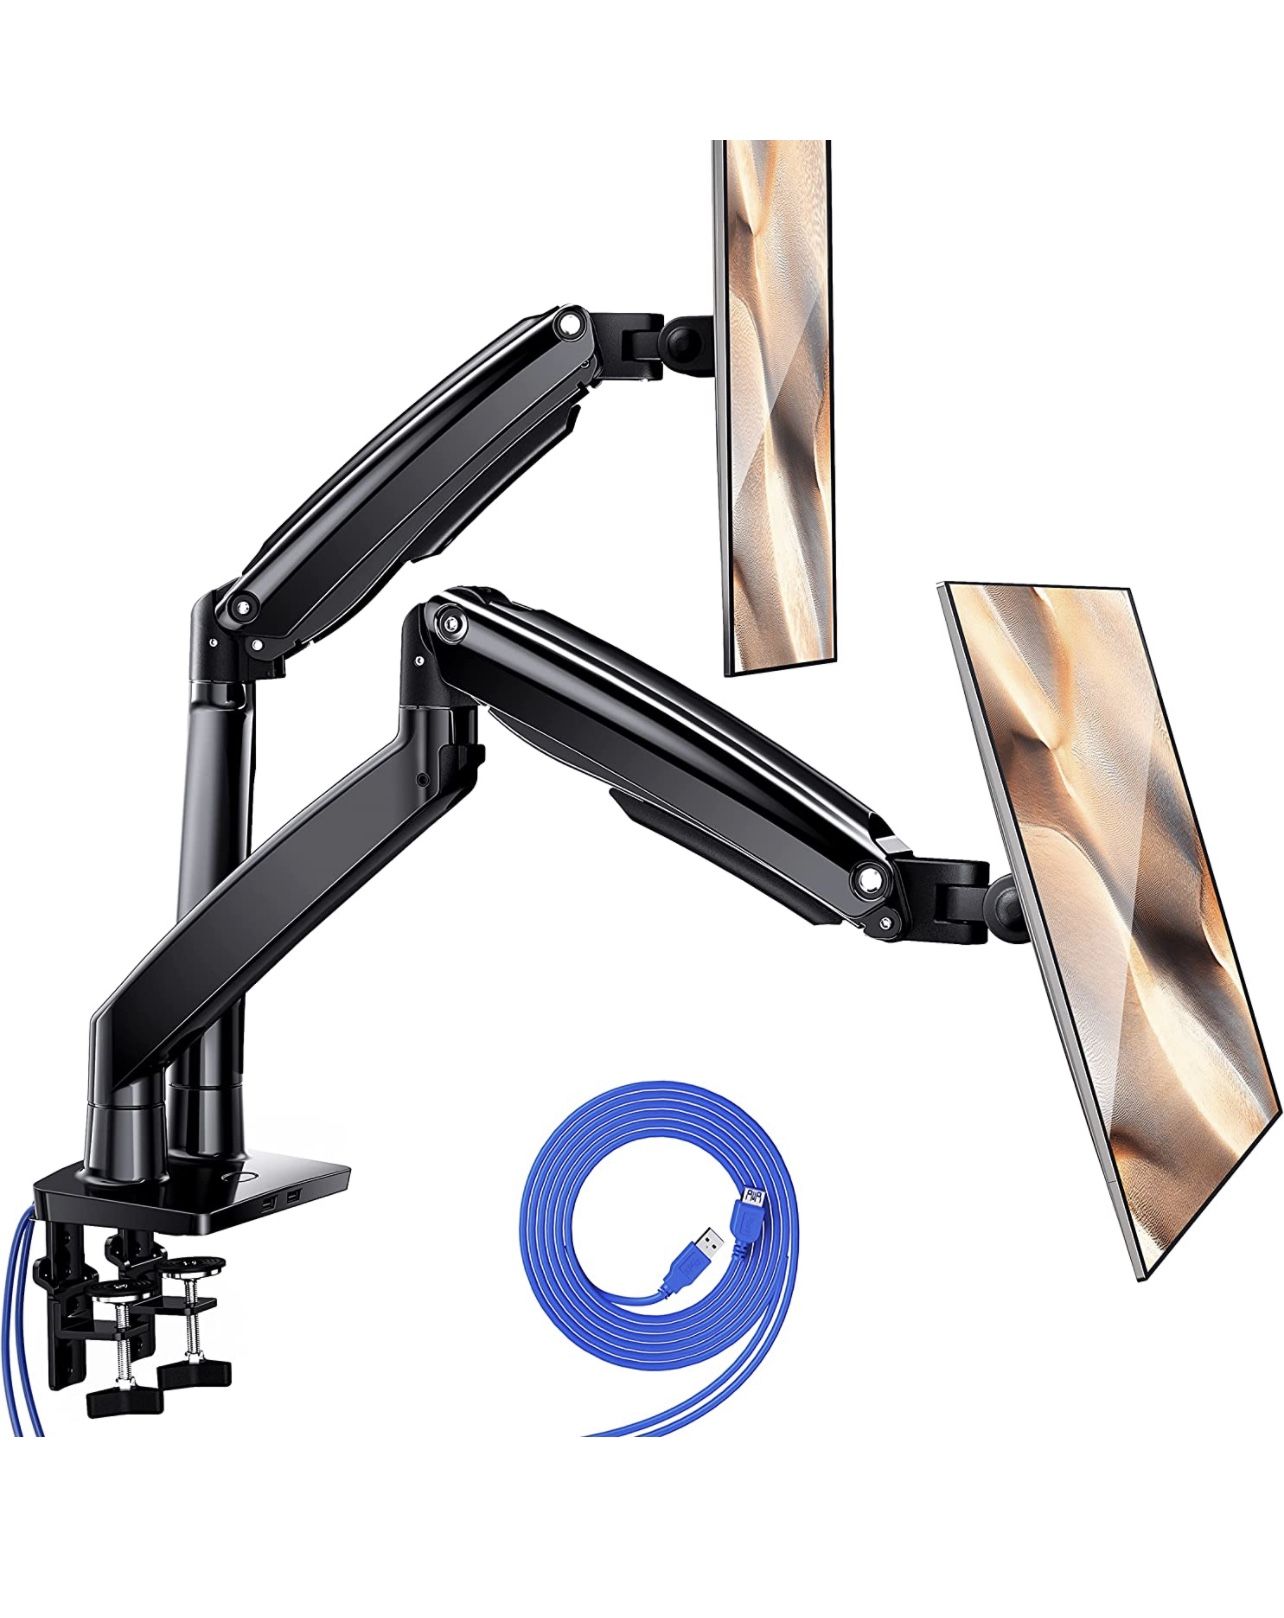 Dual Monitor Arm Desk Mount Full Motion, Each Arm Holds up to 26.4lbs